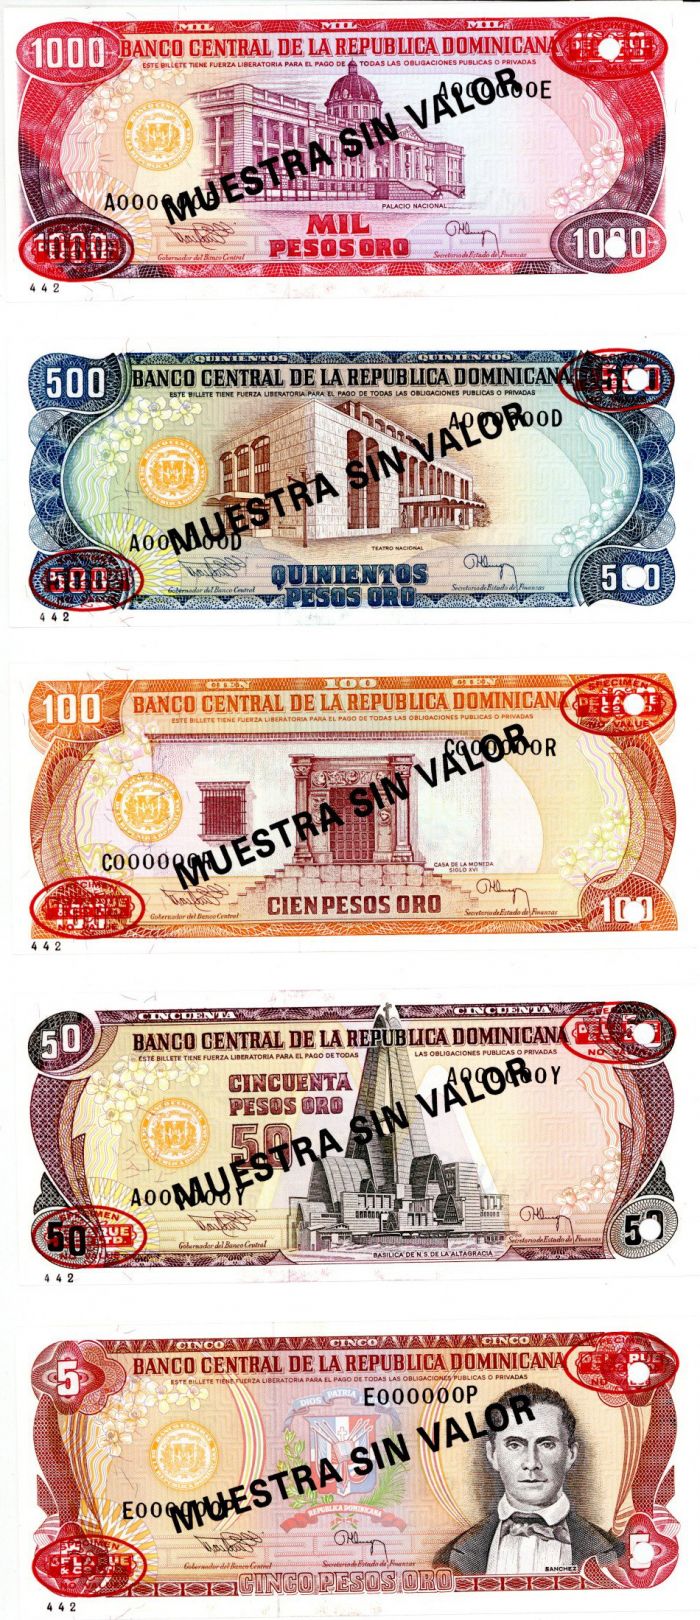 Dominican Republic - Set of 5 (5,50,100,500,1000 Pesos Oro) - P-146 and 4 unlisted - 1994 dated Foreign Paper Money